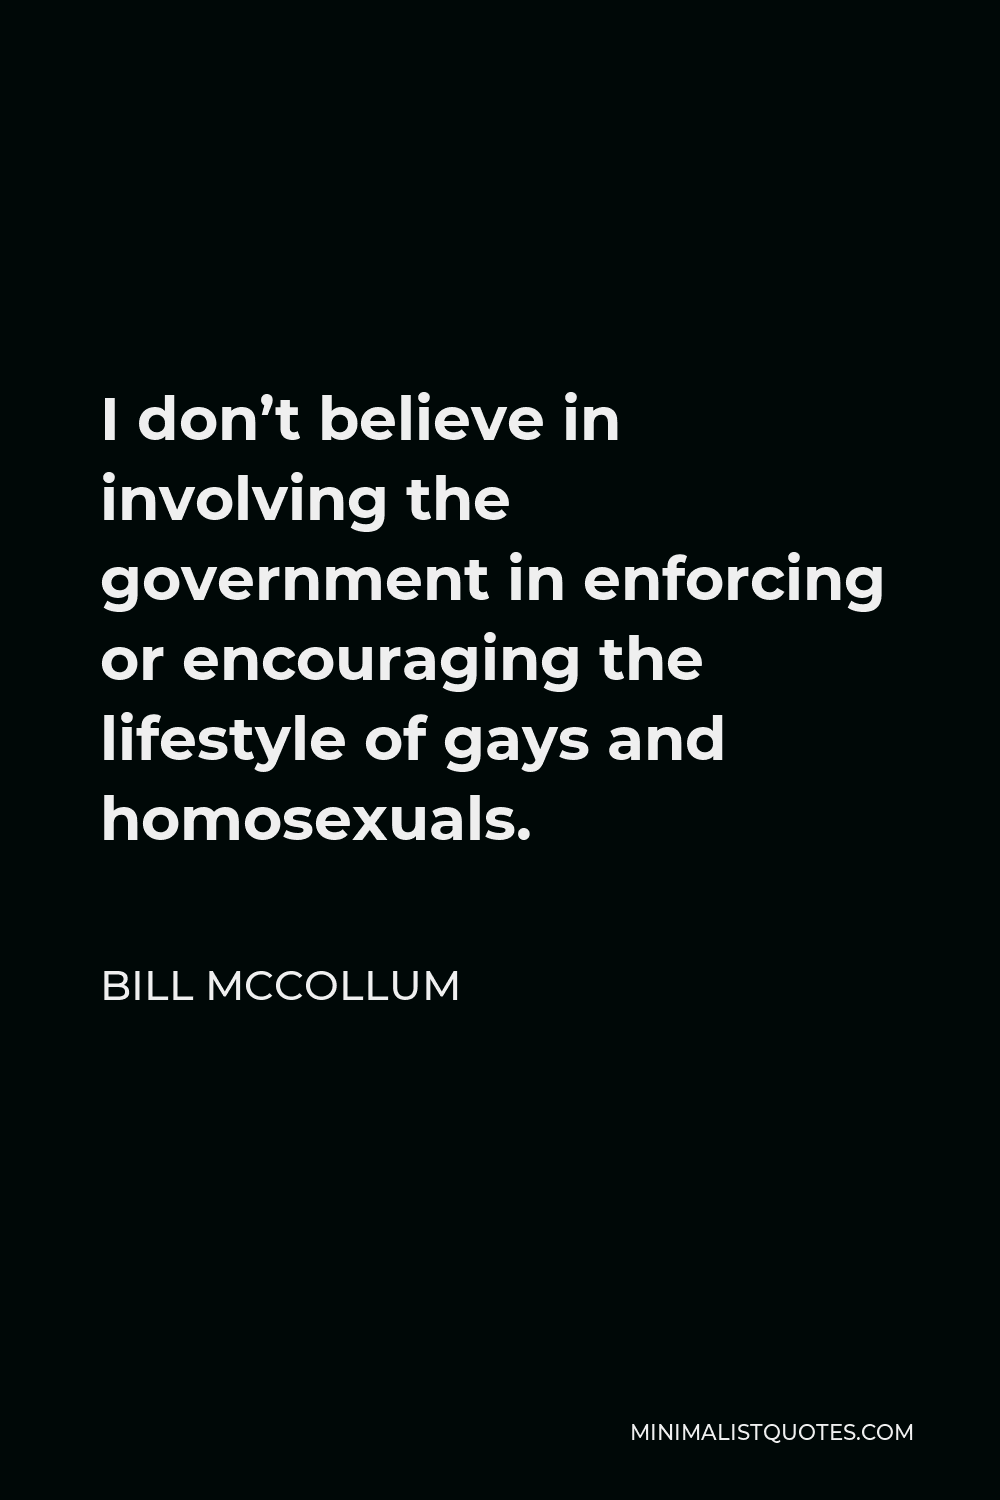 Bill McCollum Quote - I don’t believe in involving the government in enforcing or encouraging the lifestyle of gays and homosexuals.